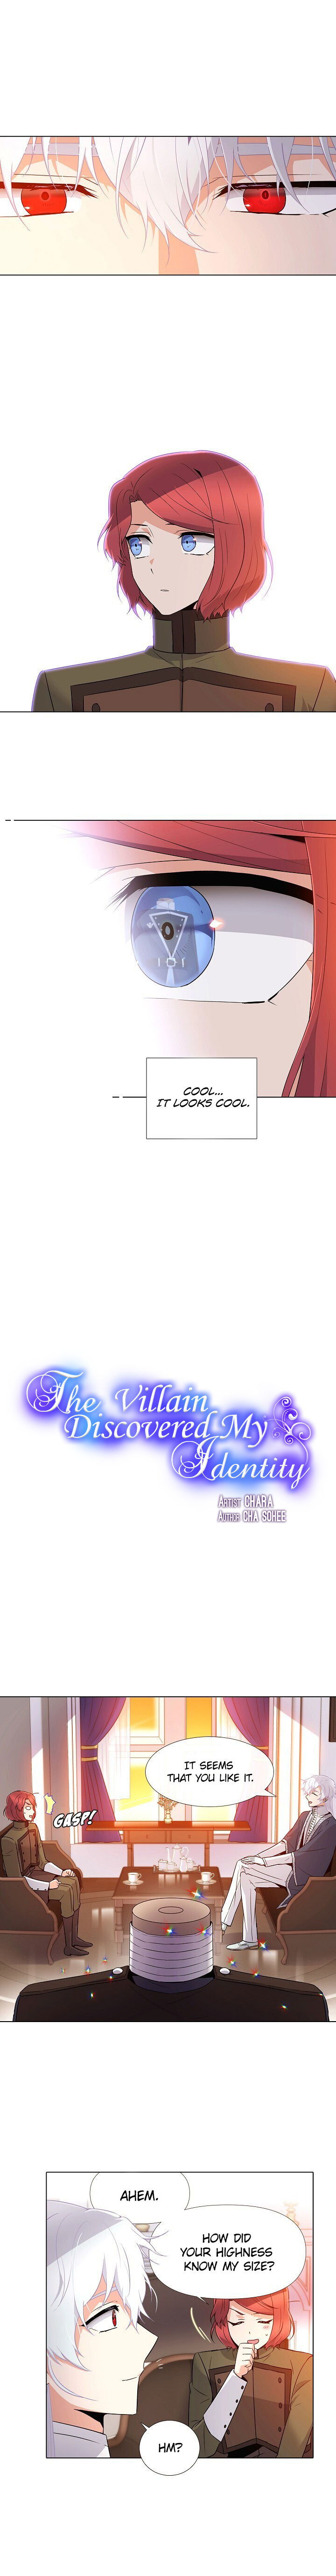 the-villain-discovered-my-identity-chap-15-4